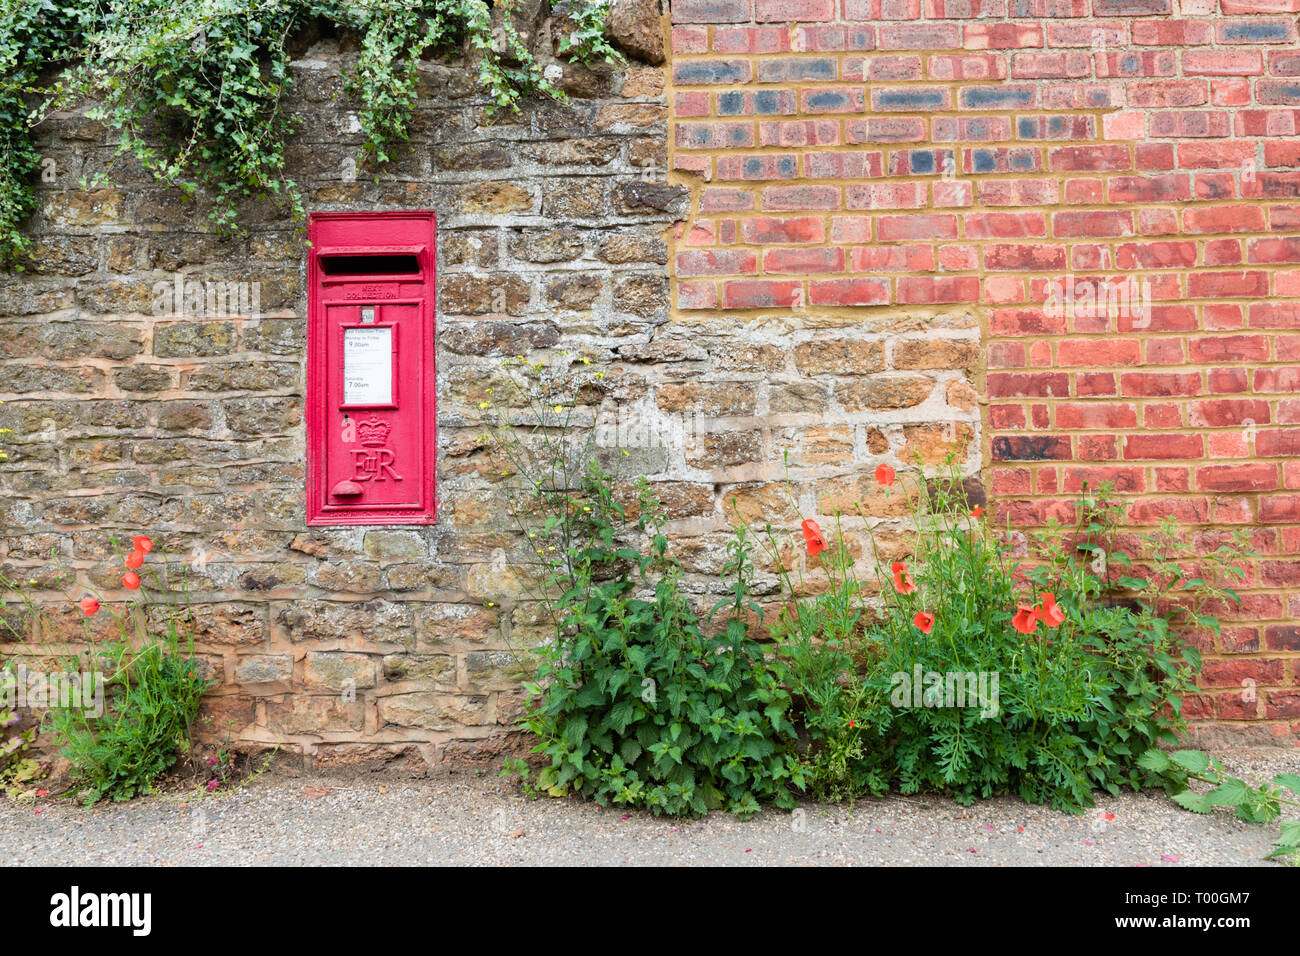 A red village post box set into a stone wall. Ivy hangs over the top of the wall and at the bottom poppies and nettles are growing. Stock Photo